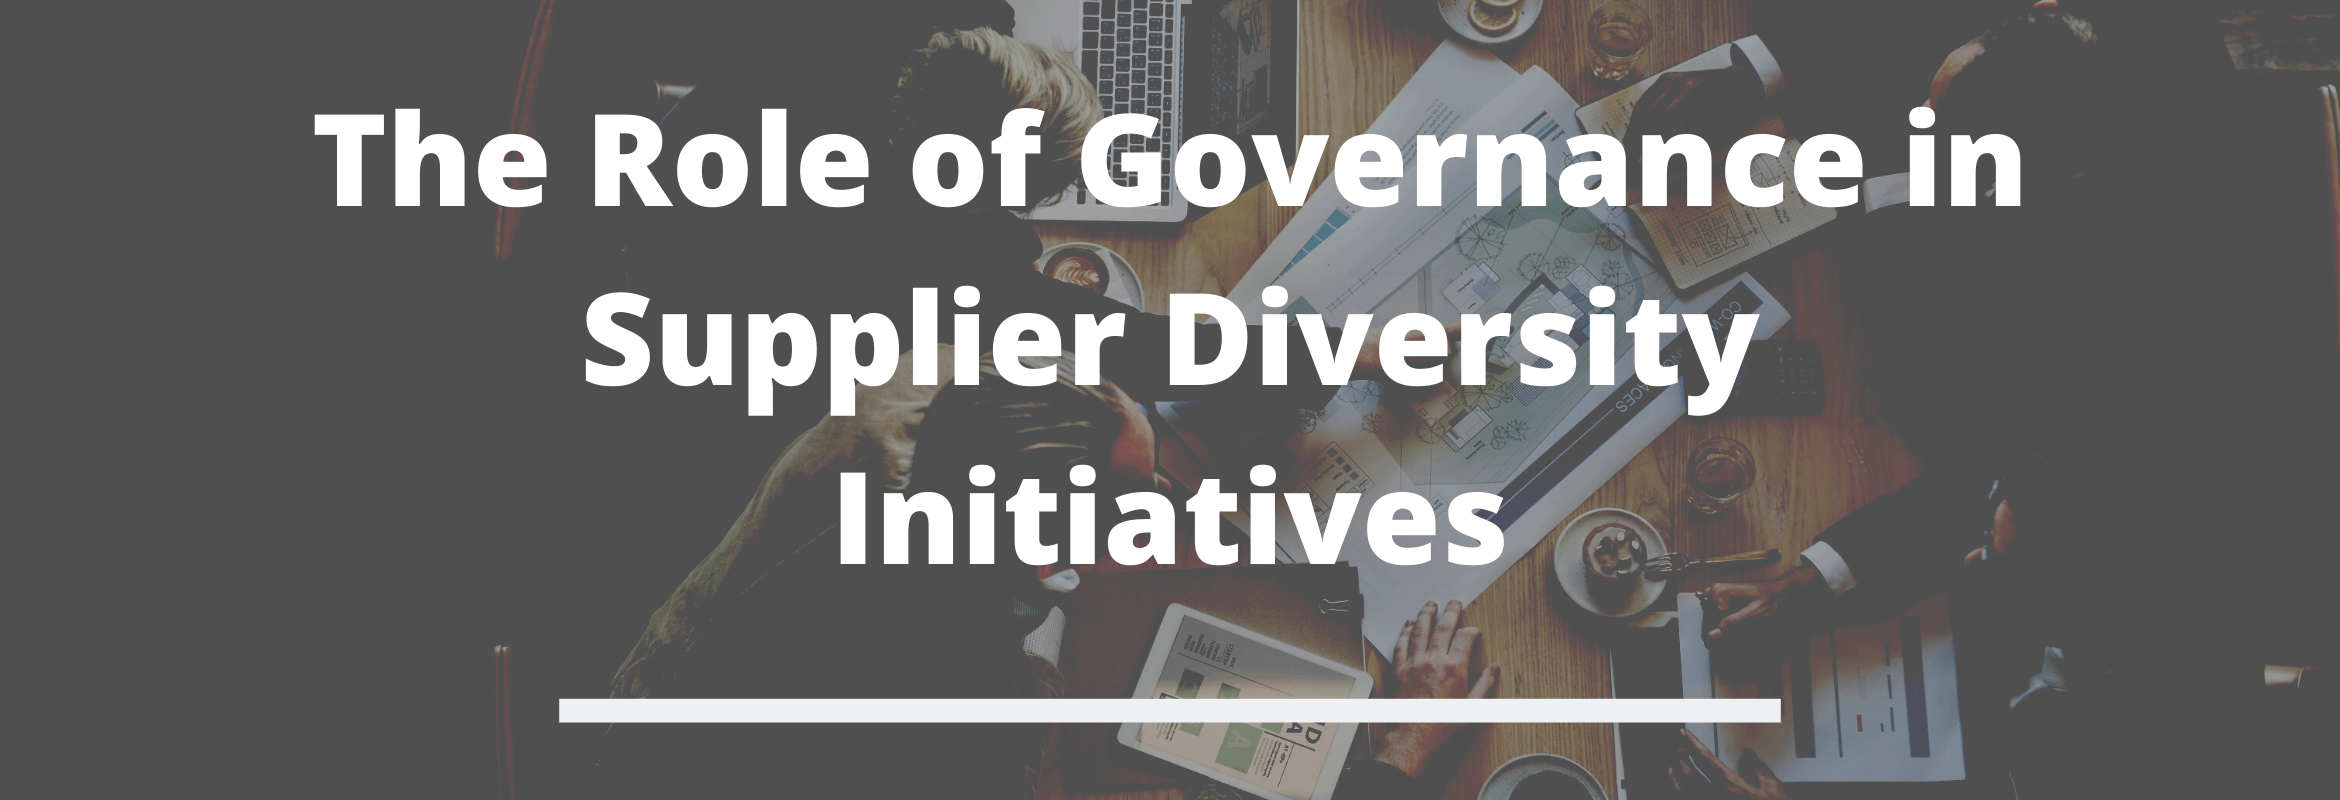 The supplier community plays an integral role in improving enterprise diversity standing.